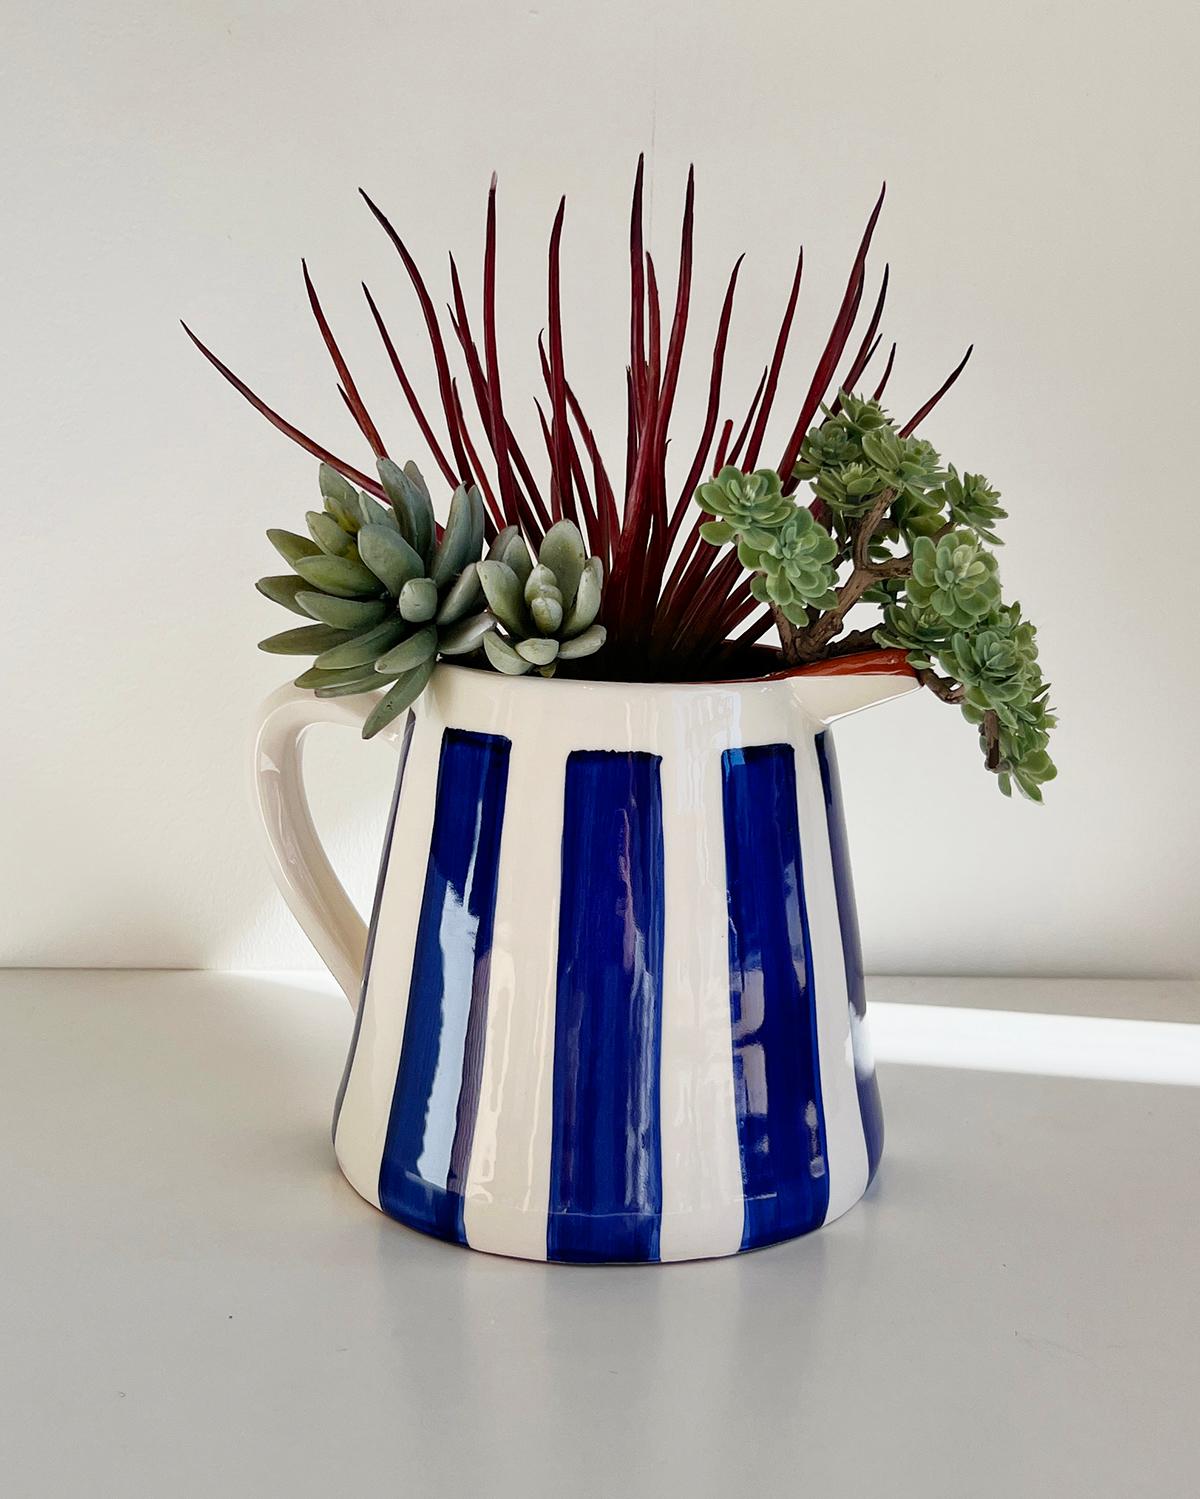 This gorgeous striped terracotta pitcher is the perfect vessel for your next dinner party. Great as a vase for flowers or as a holiday or wedding gift, this jug can hold anything from branches to flowers to mimosas. The bold graphic look blends